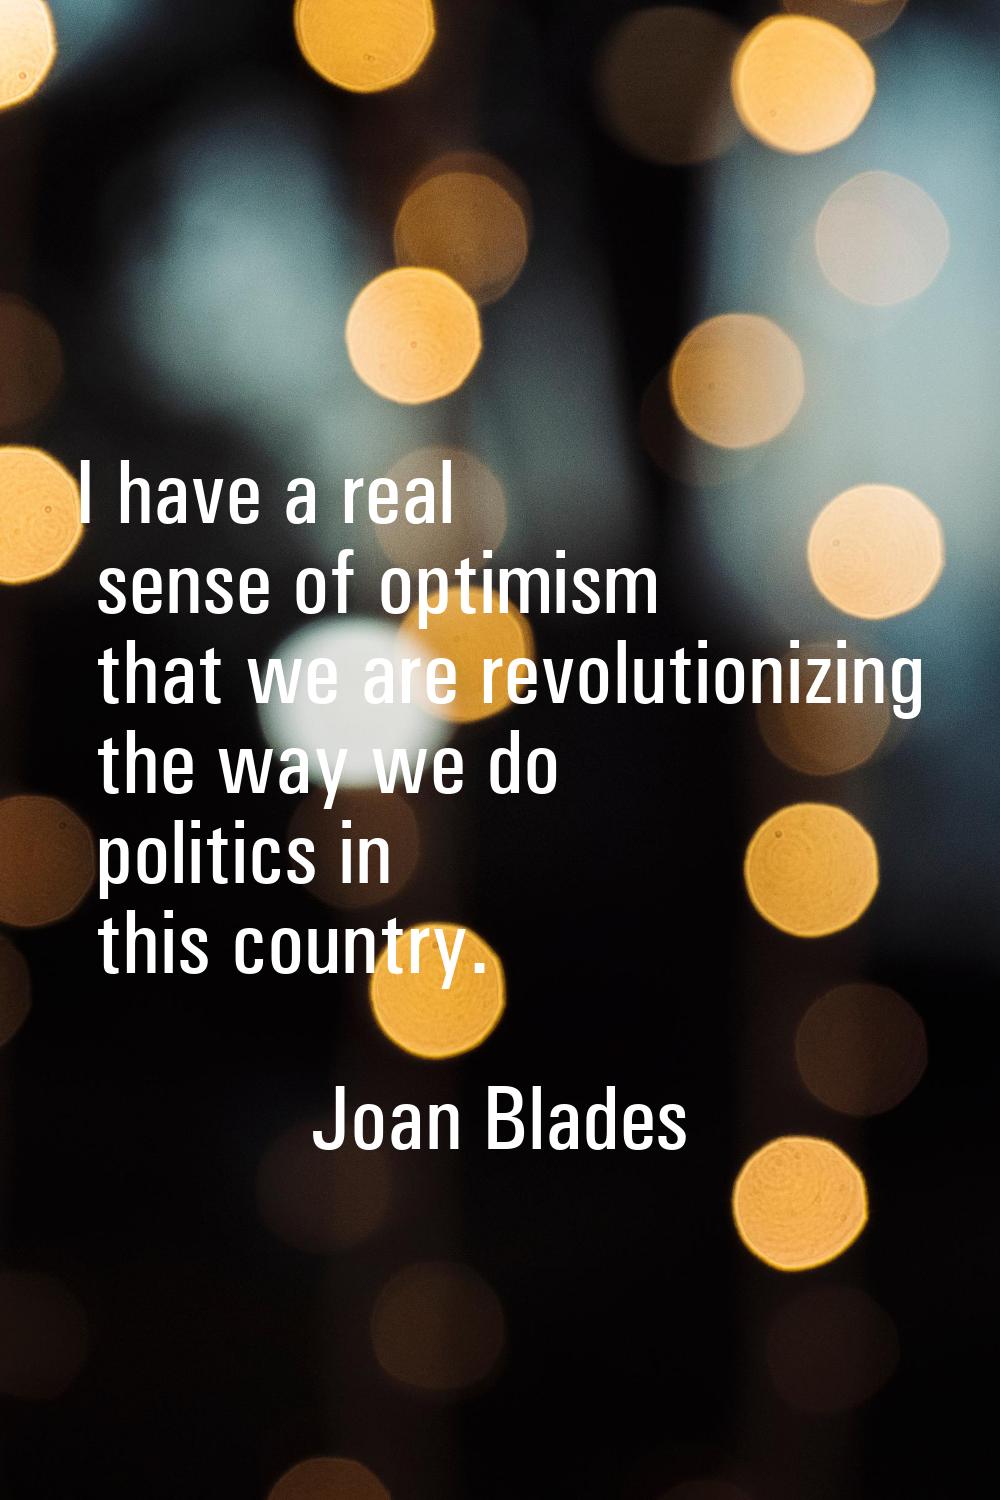 I have a real sense of optimism that we are revolutionizing the way we do politics in this country.